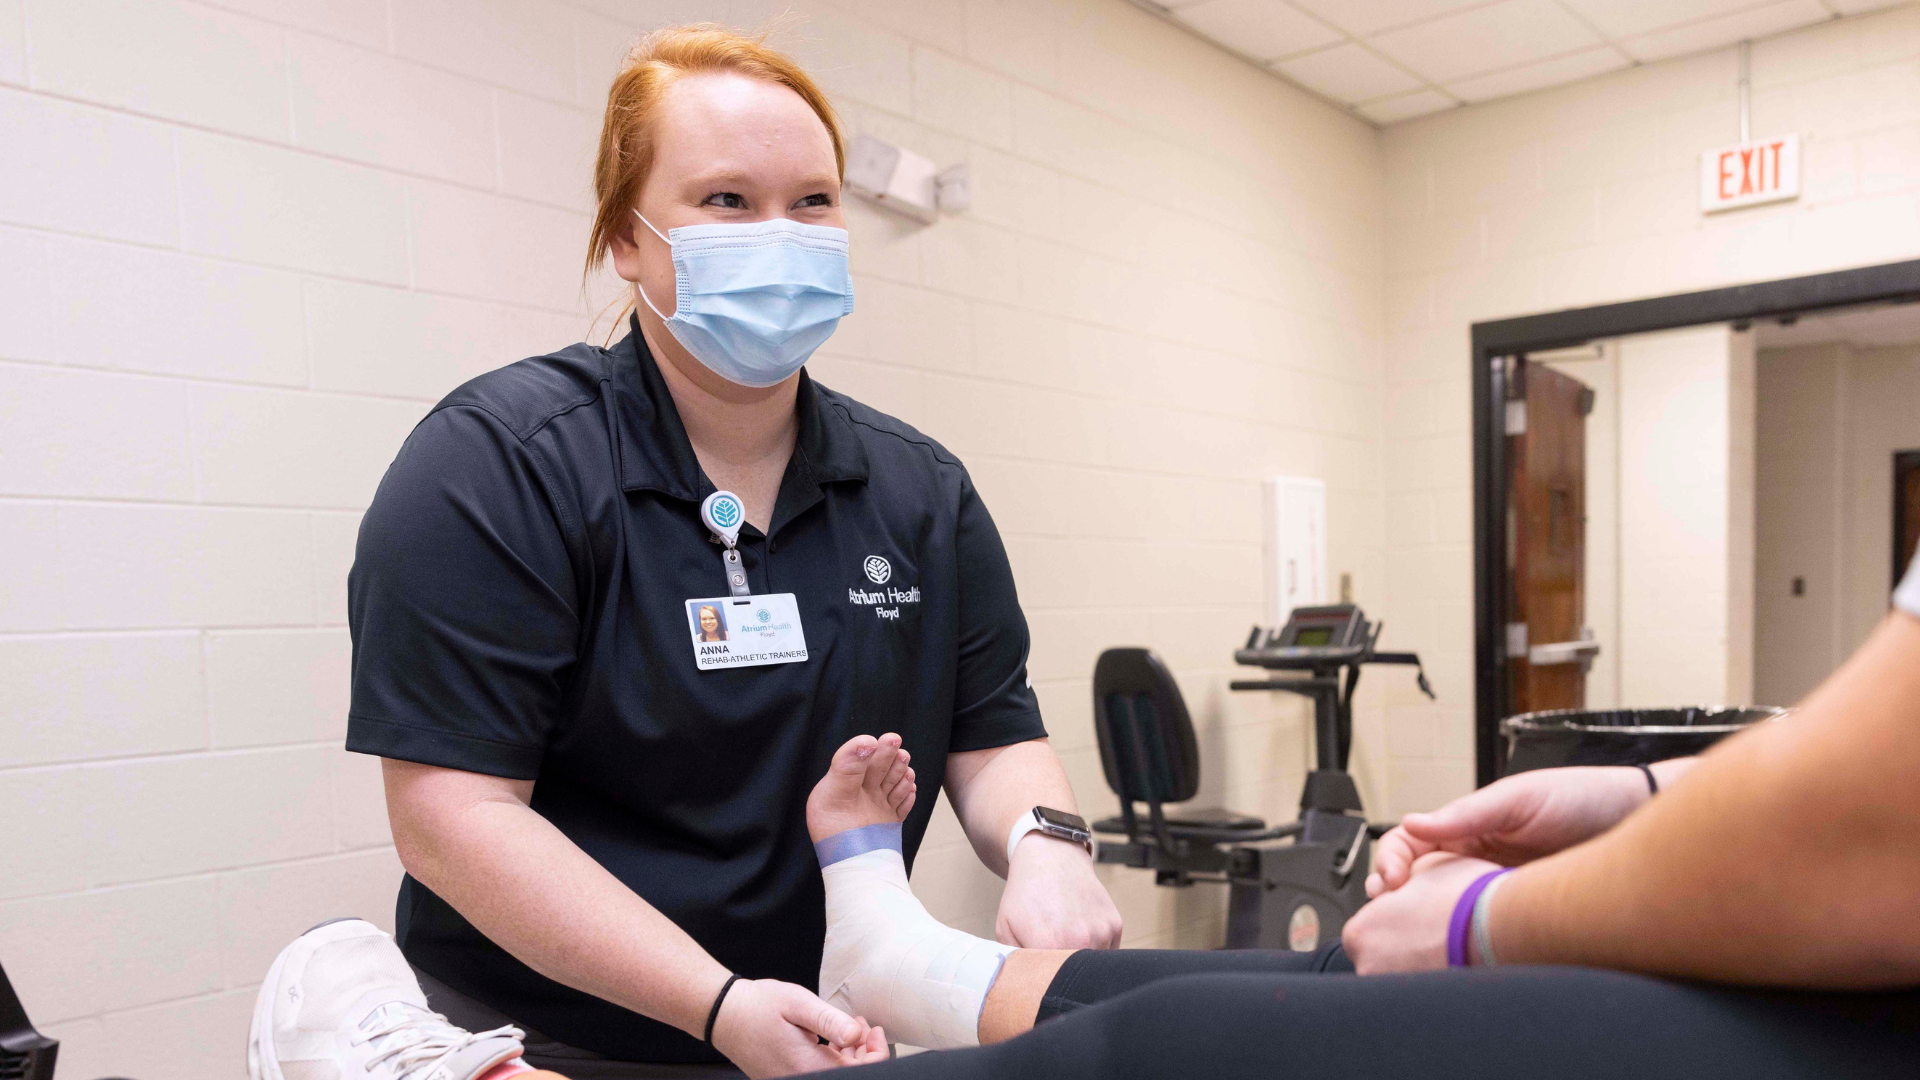 Daily Dose - Behind the Team: Meet Athletic Trainers Who Make a Difference